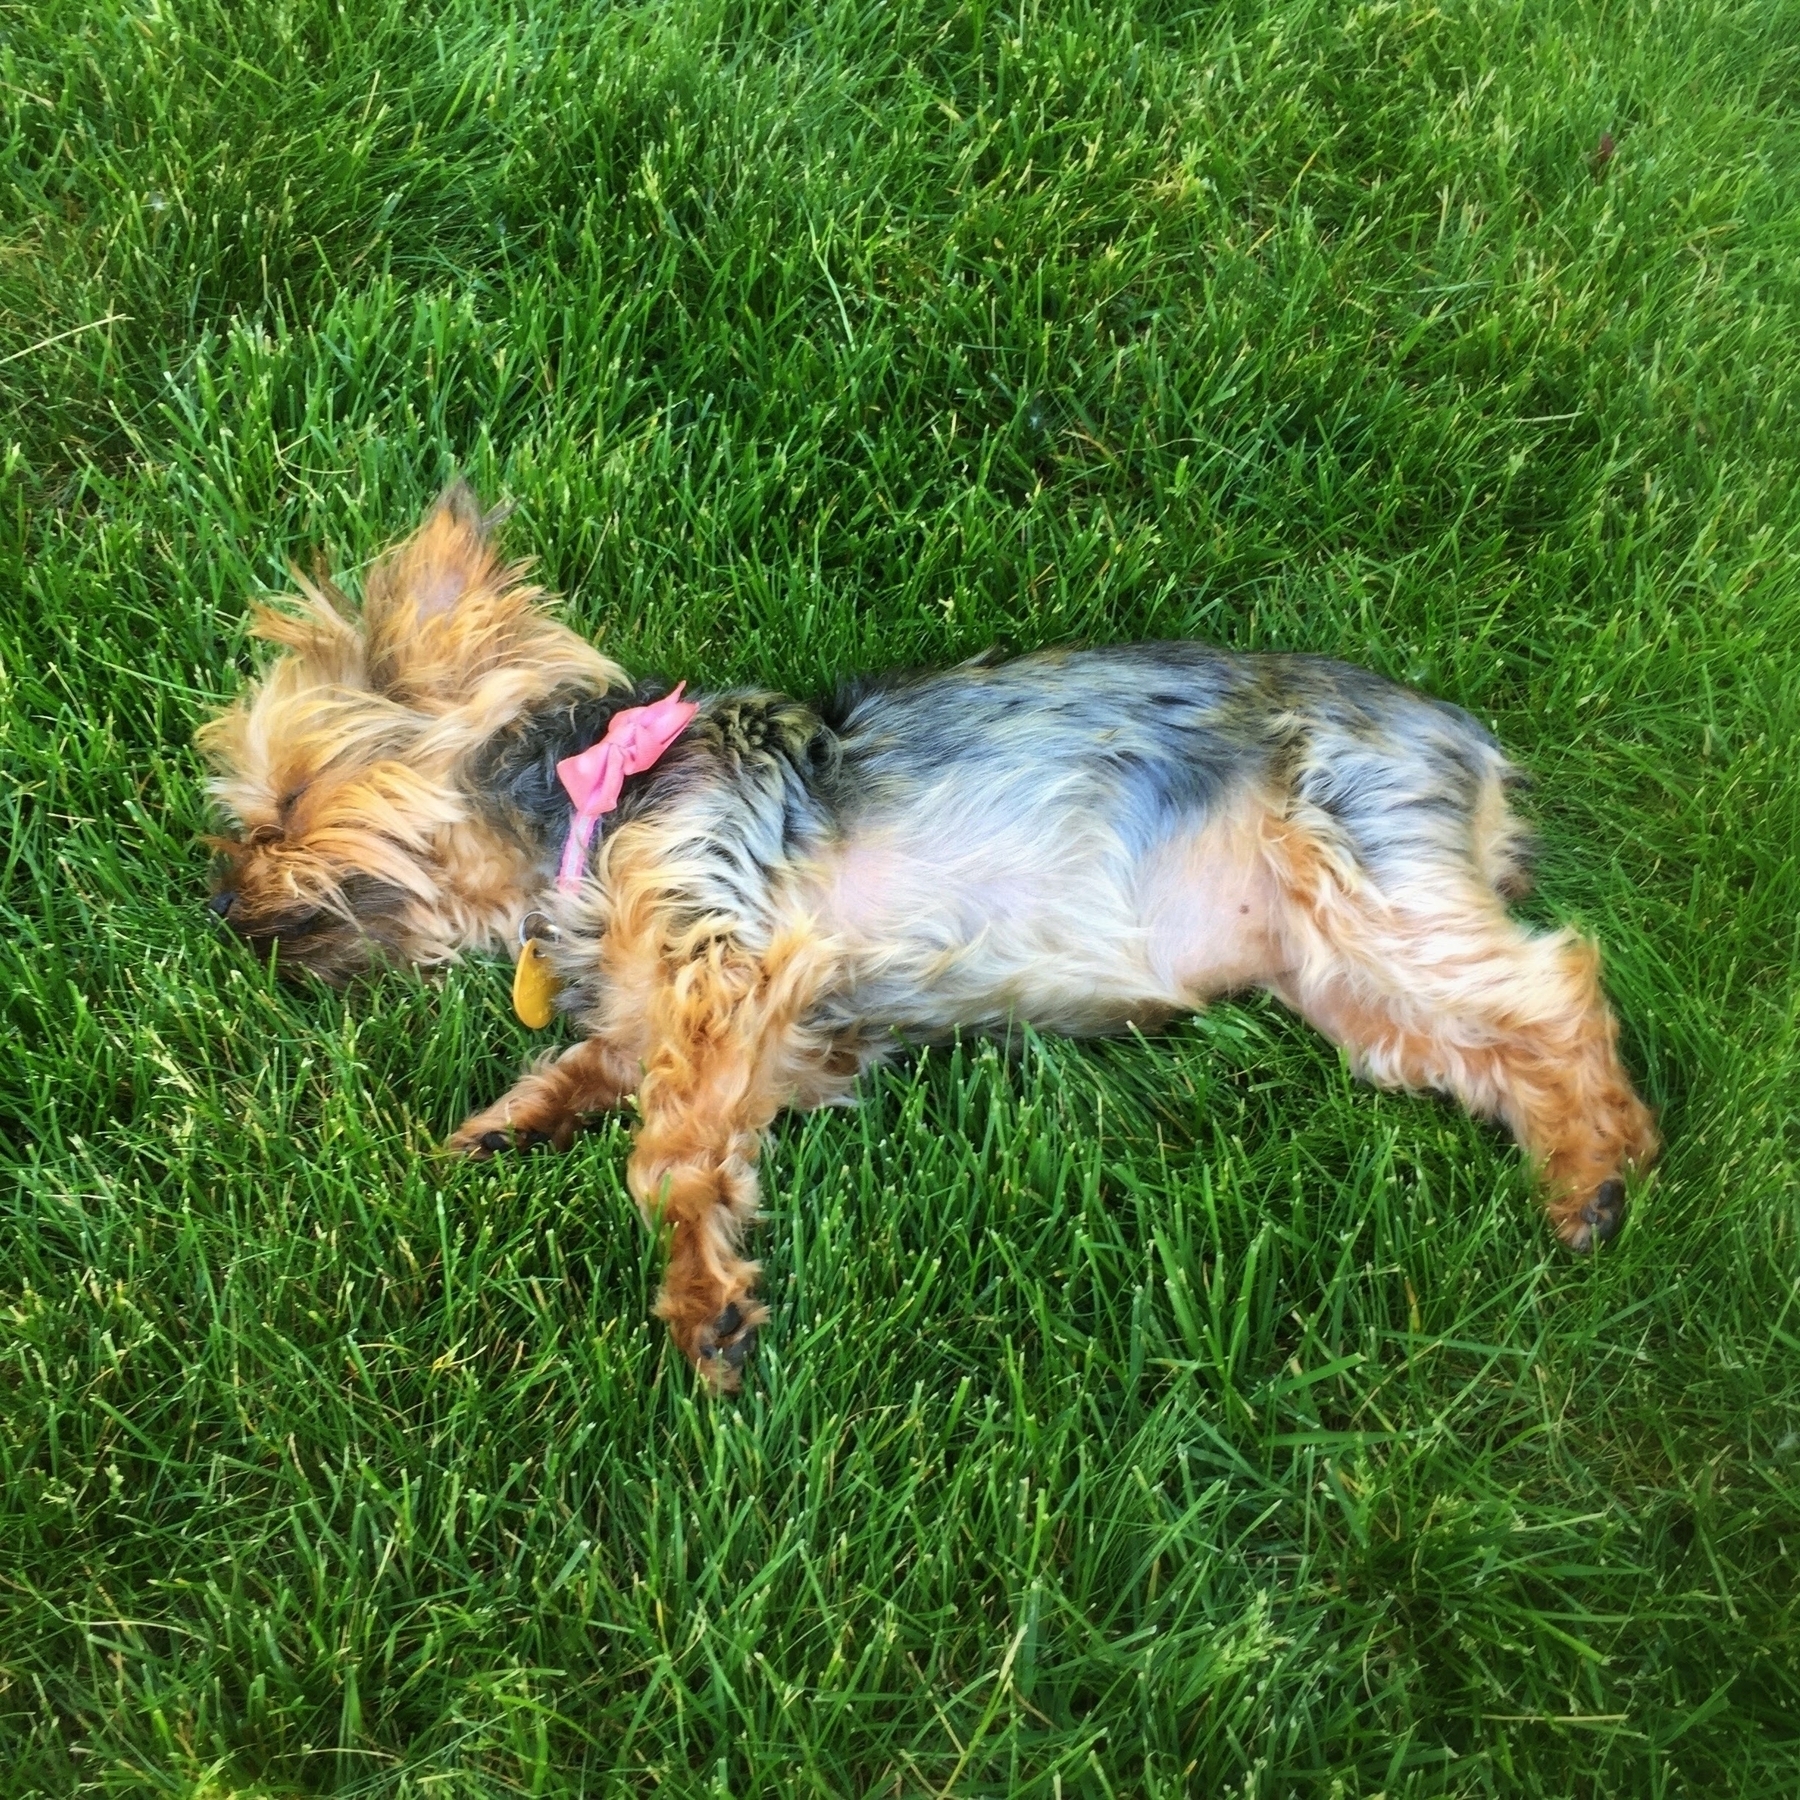 A small dog with a pink bow collar is lying on its side on lush green grass in a yard.